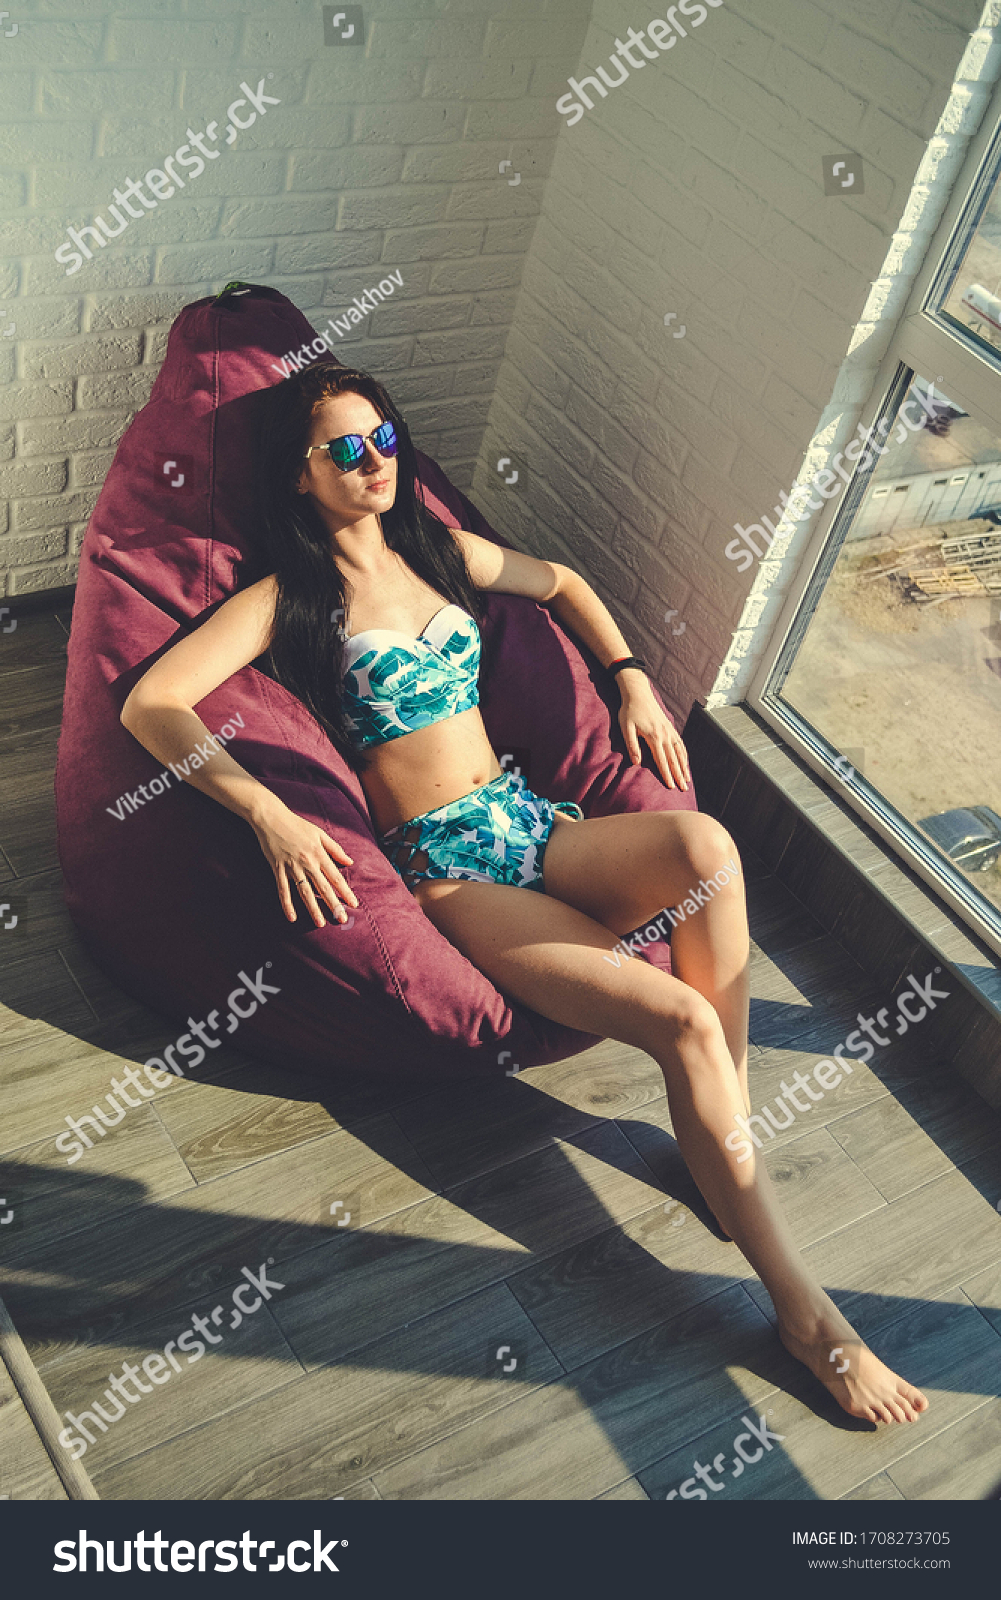 Sunbathing on the balcony. Vacation 2020. During quarantine due to the coronavirus pandemic, the girl stays at home and sunbathes on the balcony. Pretty young woman relax and sunbathing on the balcony #1708273705